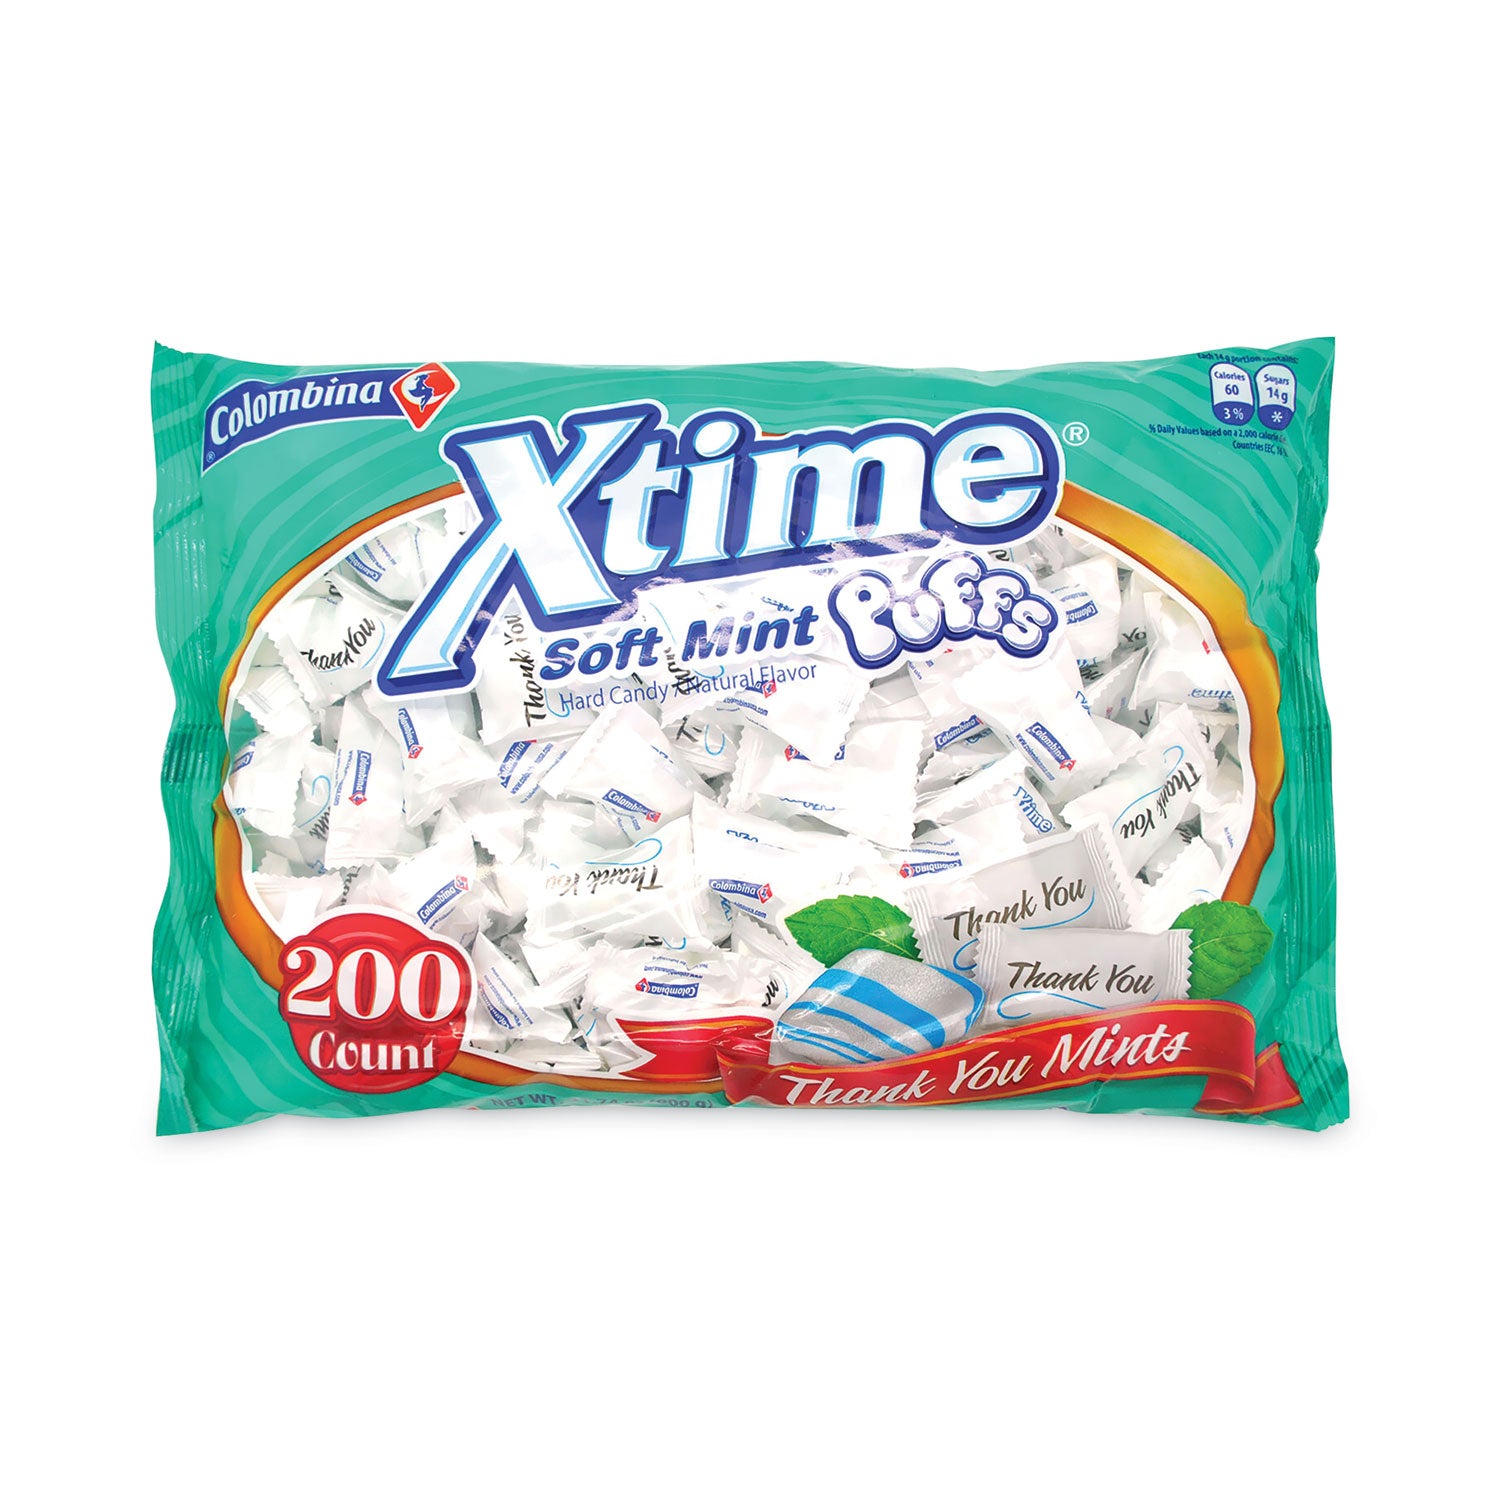 thank-you-soft-mint-puffs-200-individually-wrapped-pieces-374-oz-bag-ships-in-1-3-business-days_grr26900015 - 1